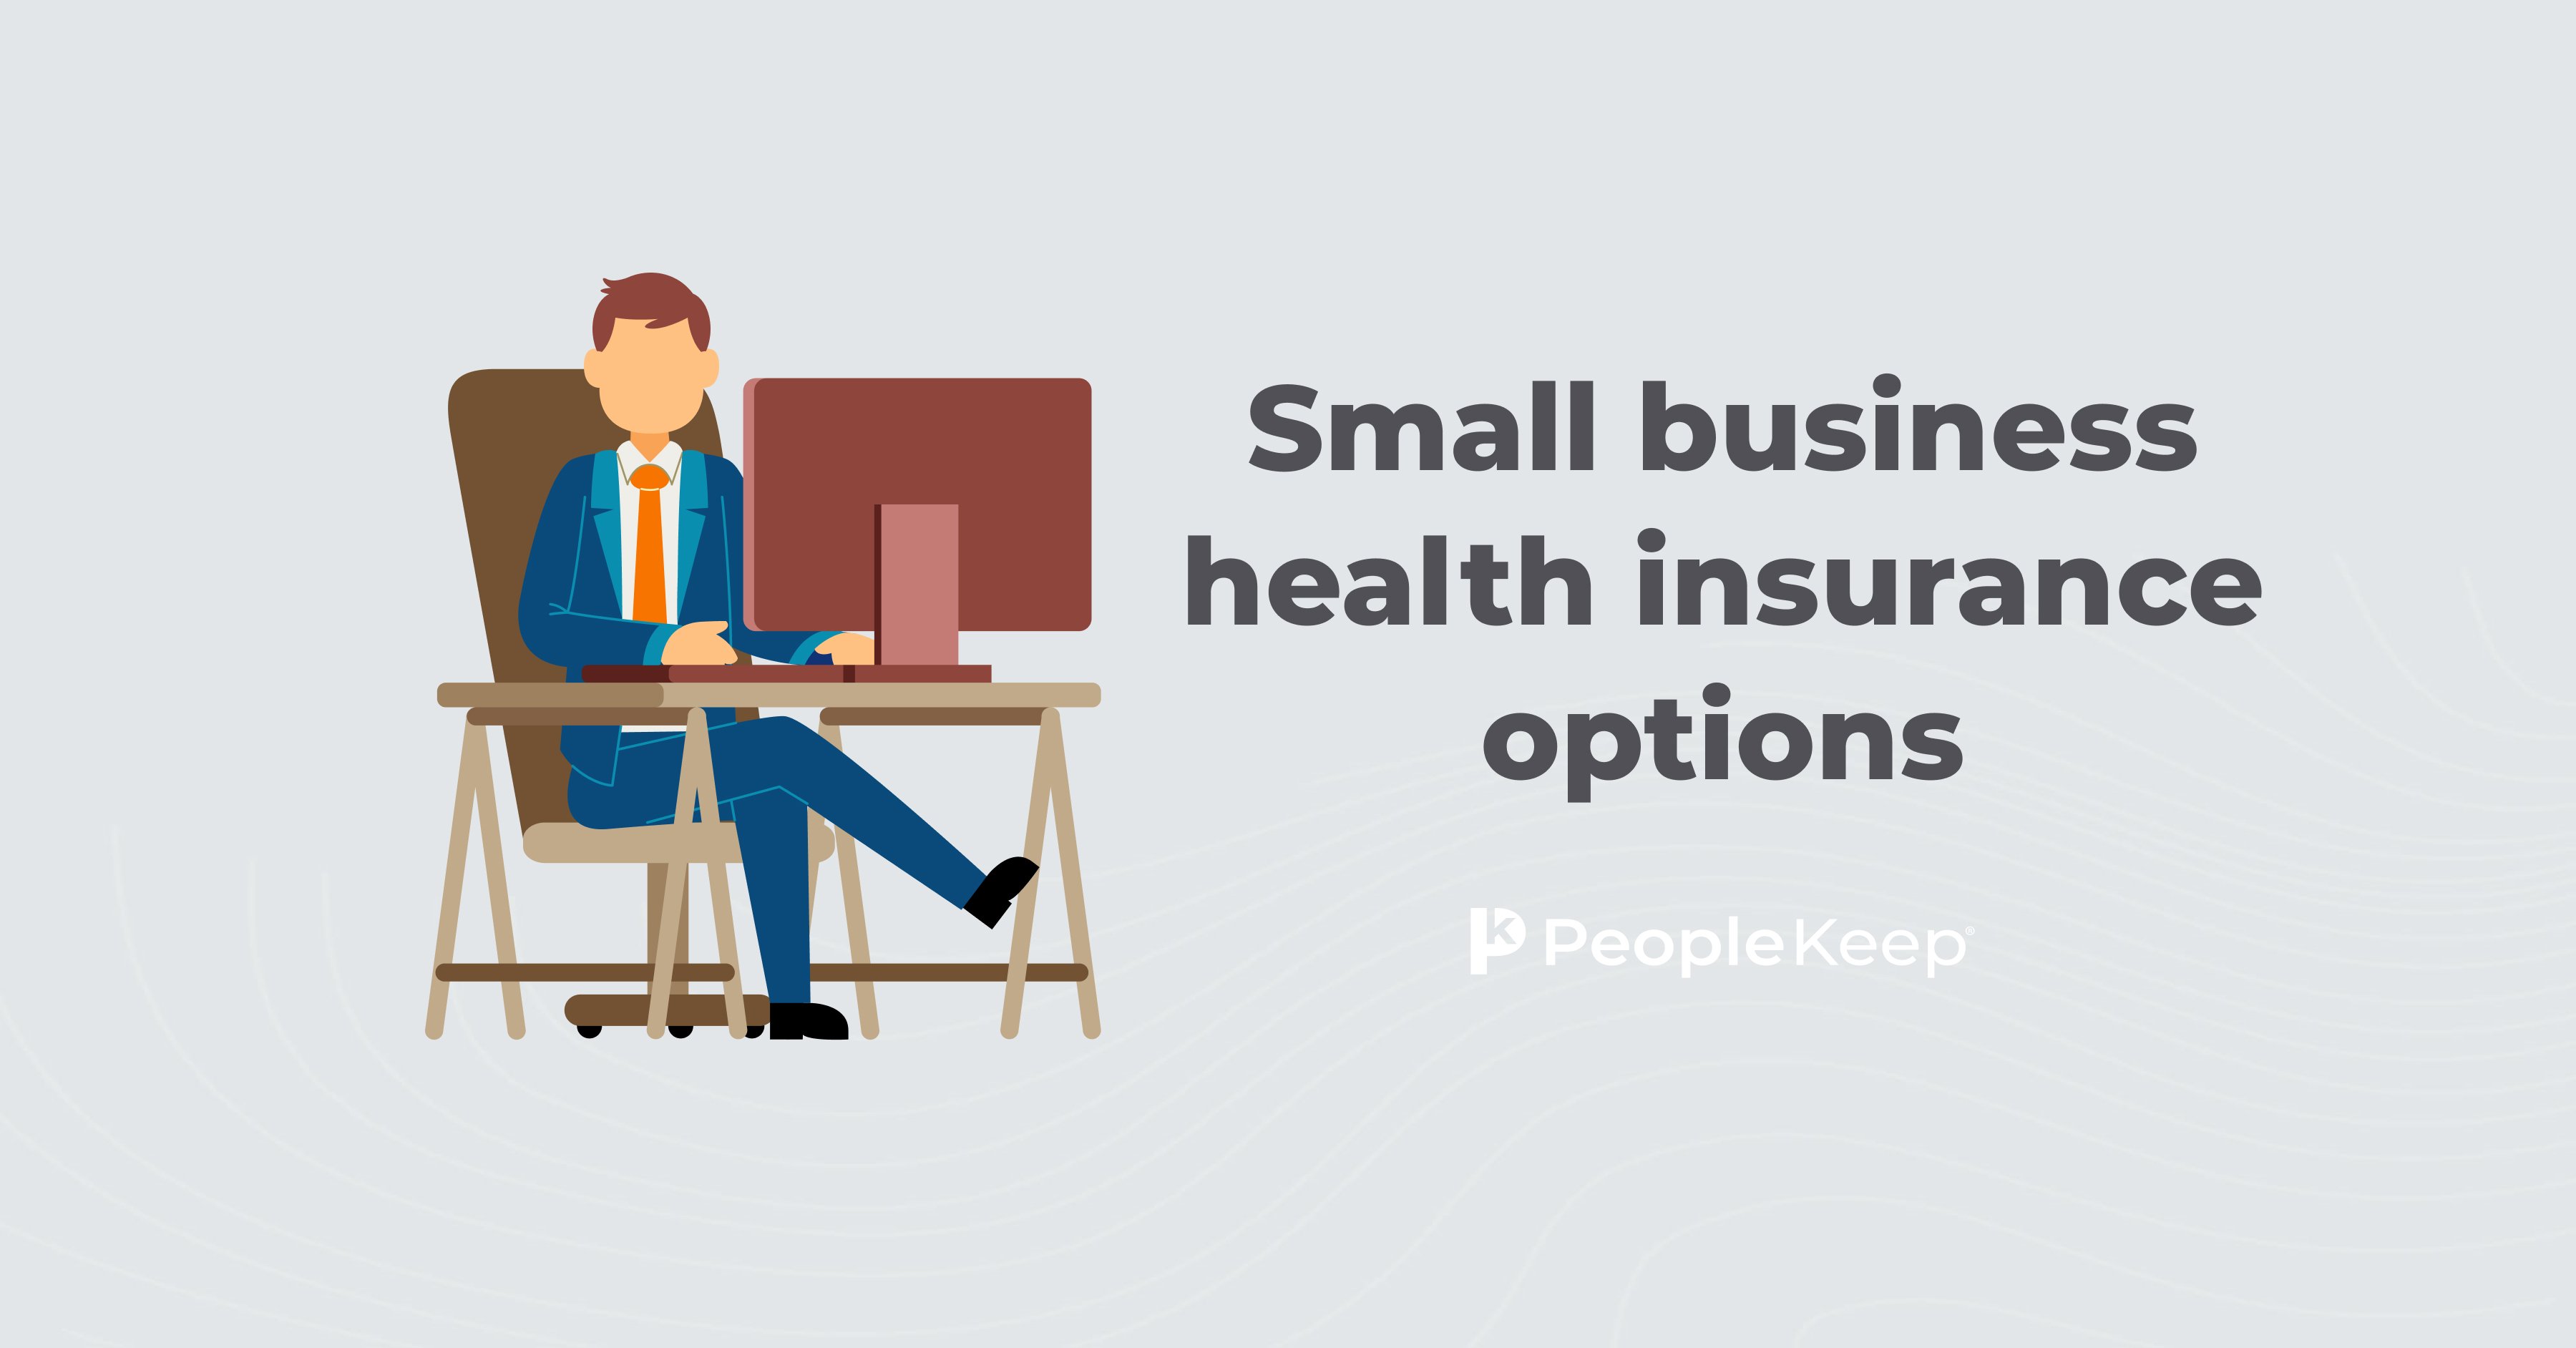 small business health insurance nyc